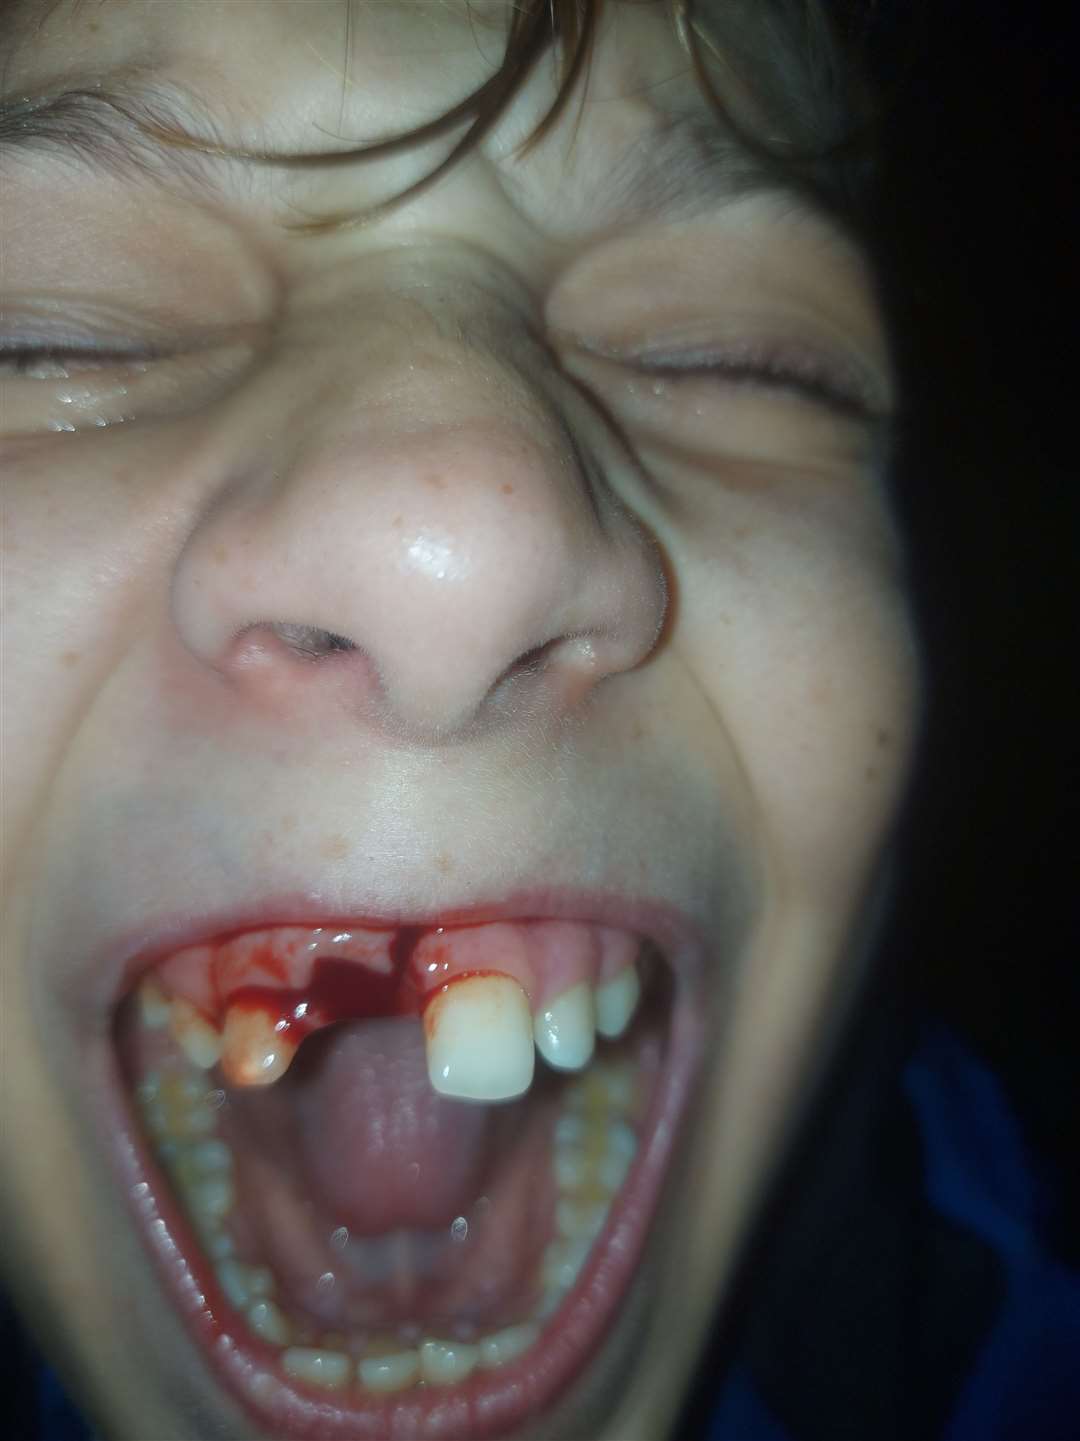 Denis-Cristian Bulancea, 12, with his missing front tooth after having it ripped out on a children's castle slide at Beachfields, Sheerness. Picture: Dumitru-Daniel Bulancea